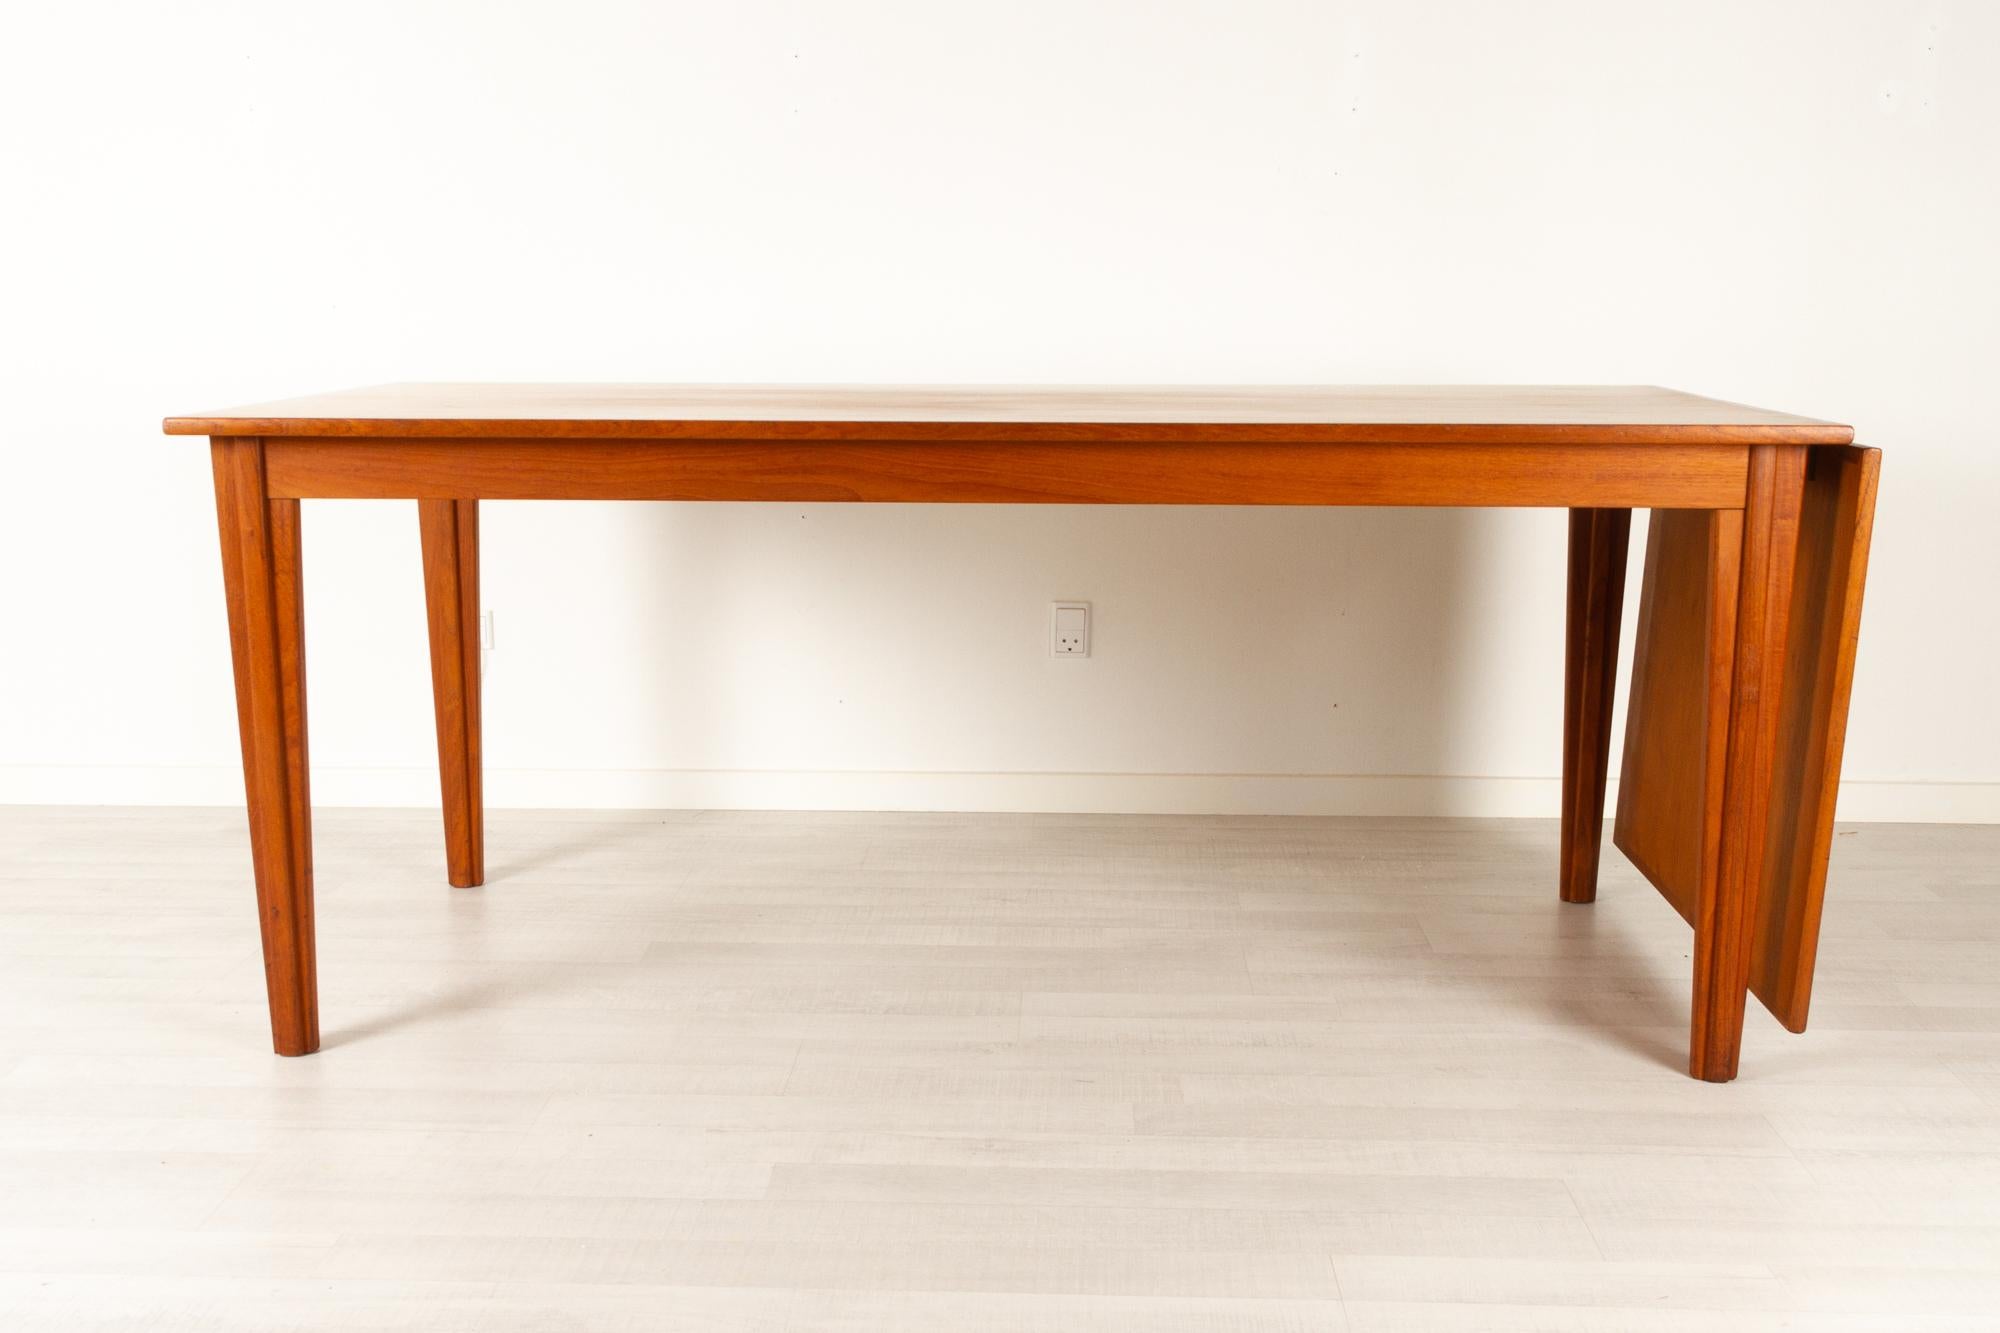 Danish modern teak drop leaf dining table, 1960s
Large dining table with drop leaf extension. Extension leaf can hang on one end or be stored under the table top. Table top slides very easily and can be operated by one person with ease. Tapered